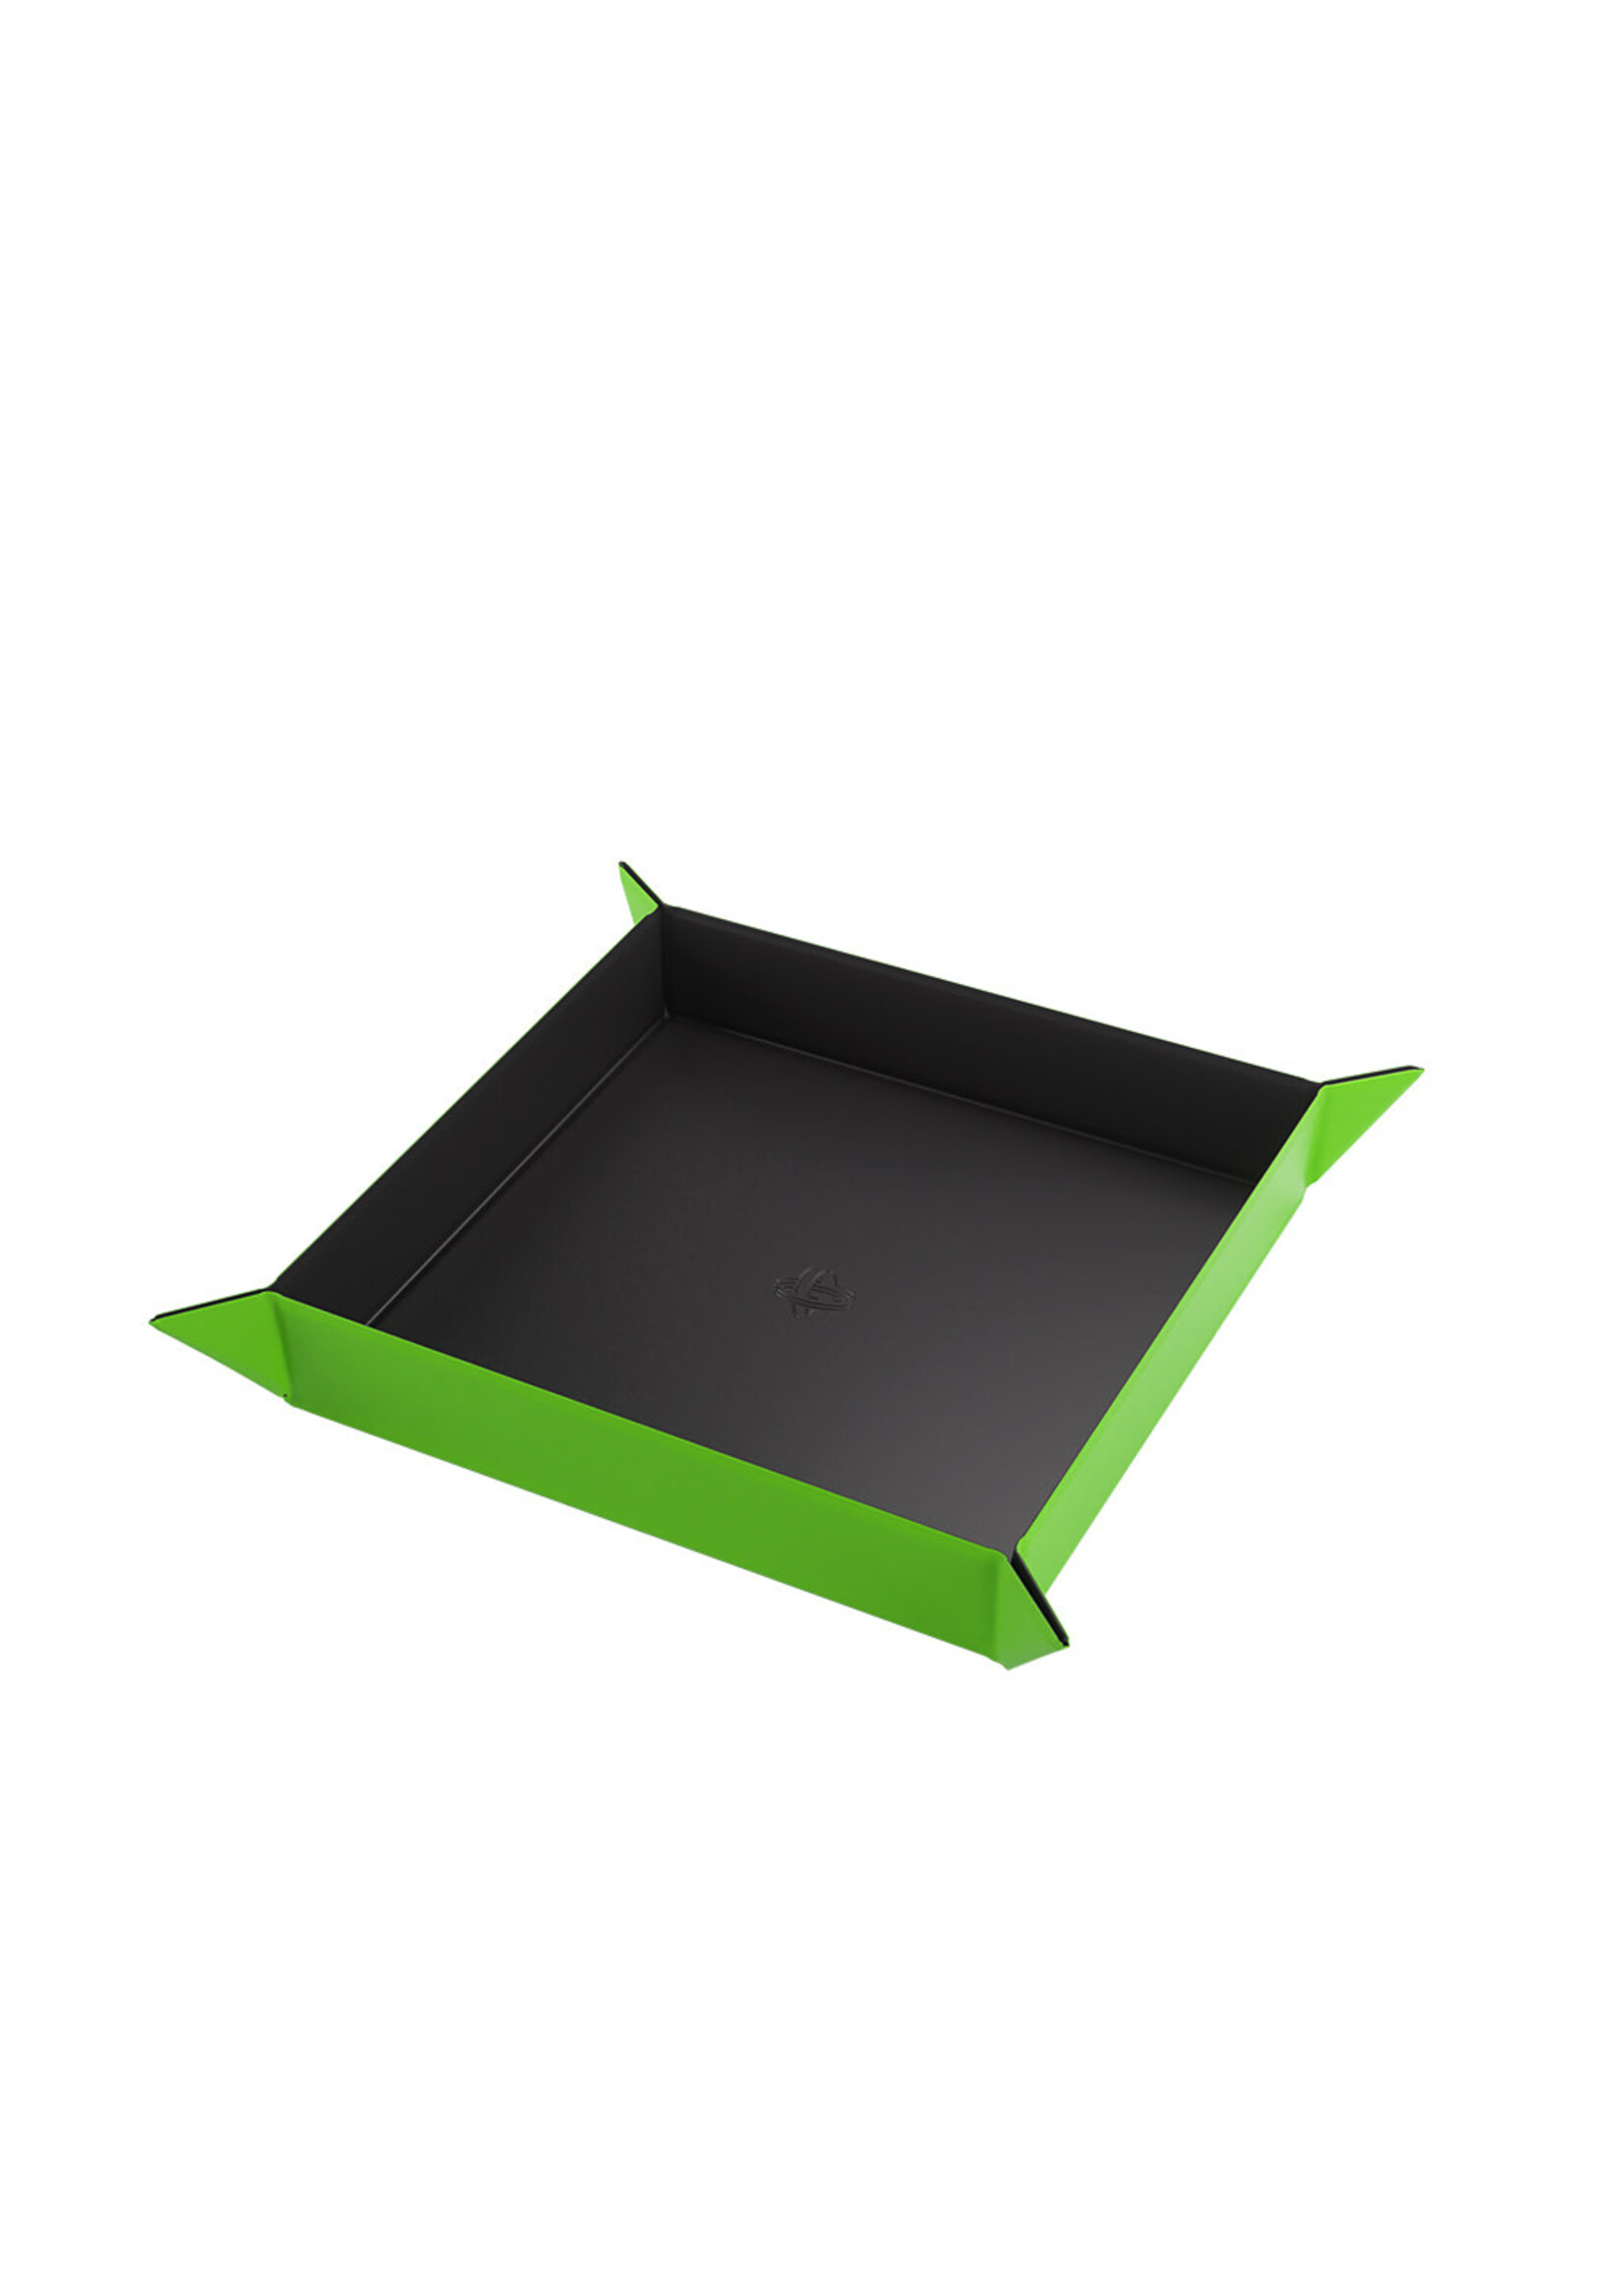 Gamegenic Magnetic Dice Tray Square Black w/ Green